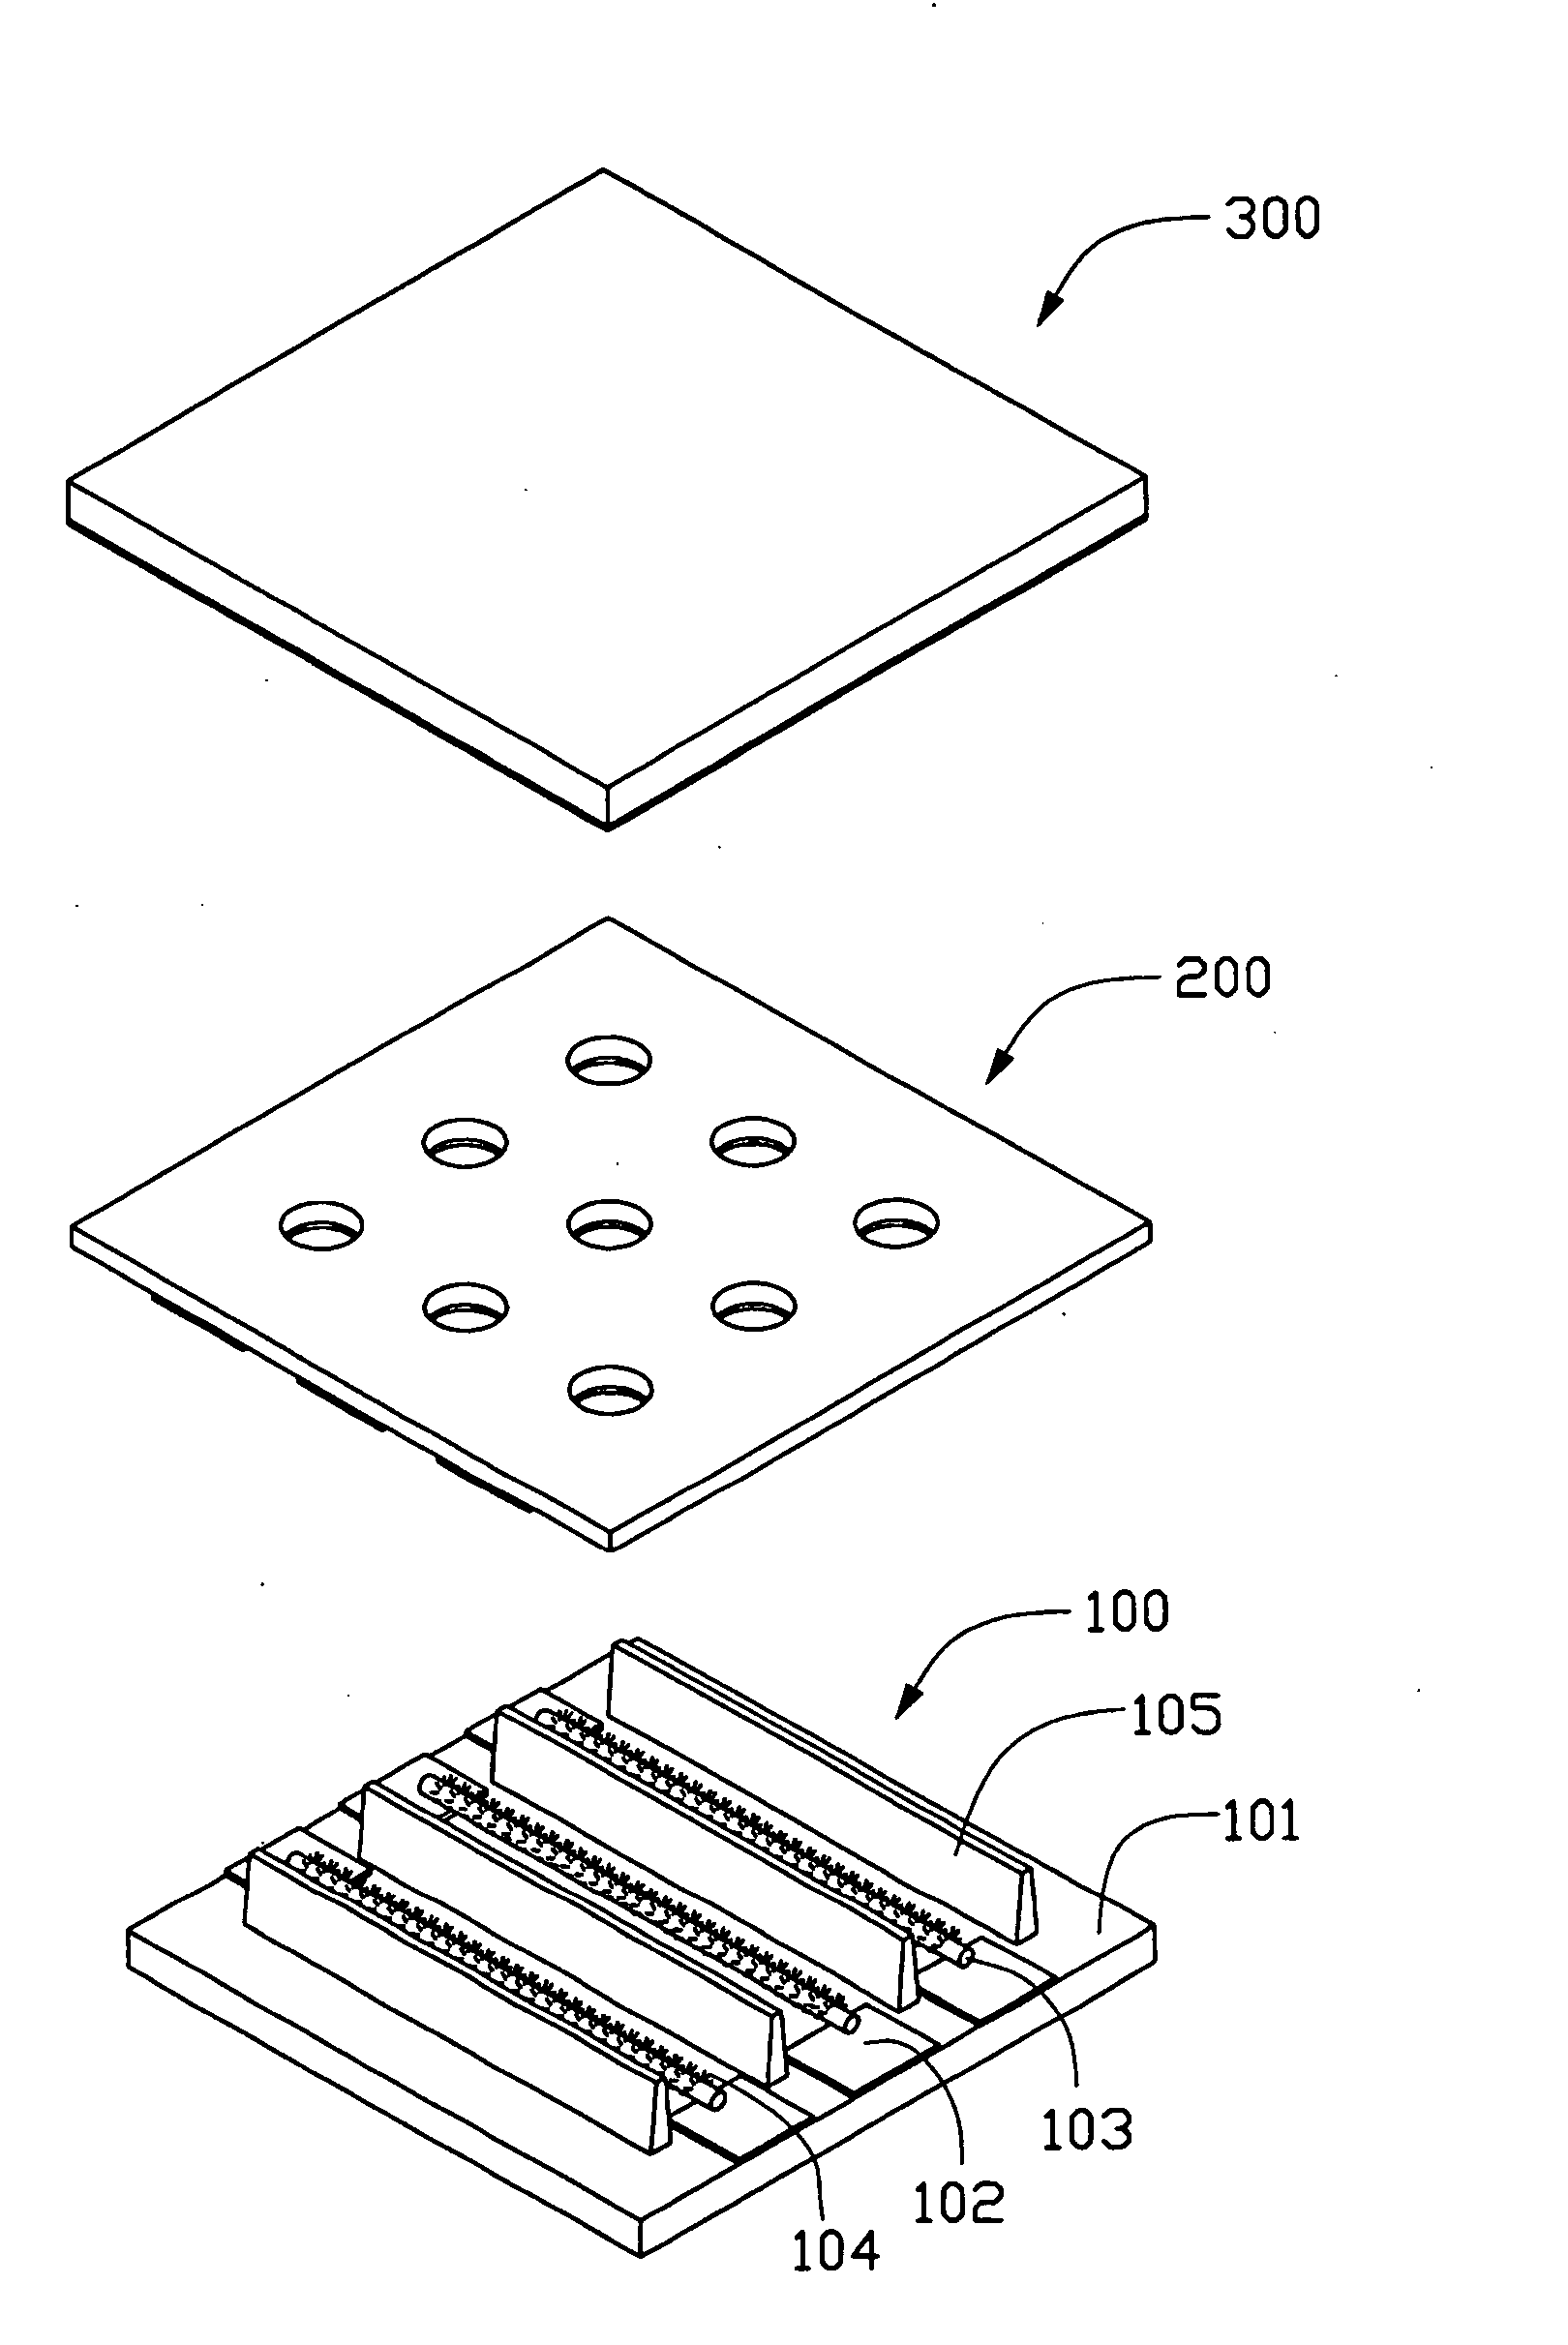 Field emission device with carbon nanotubes